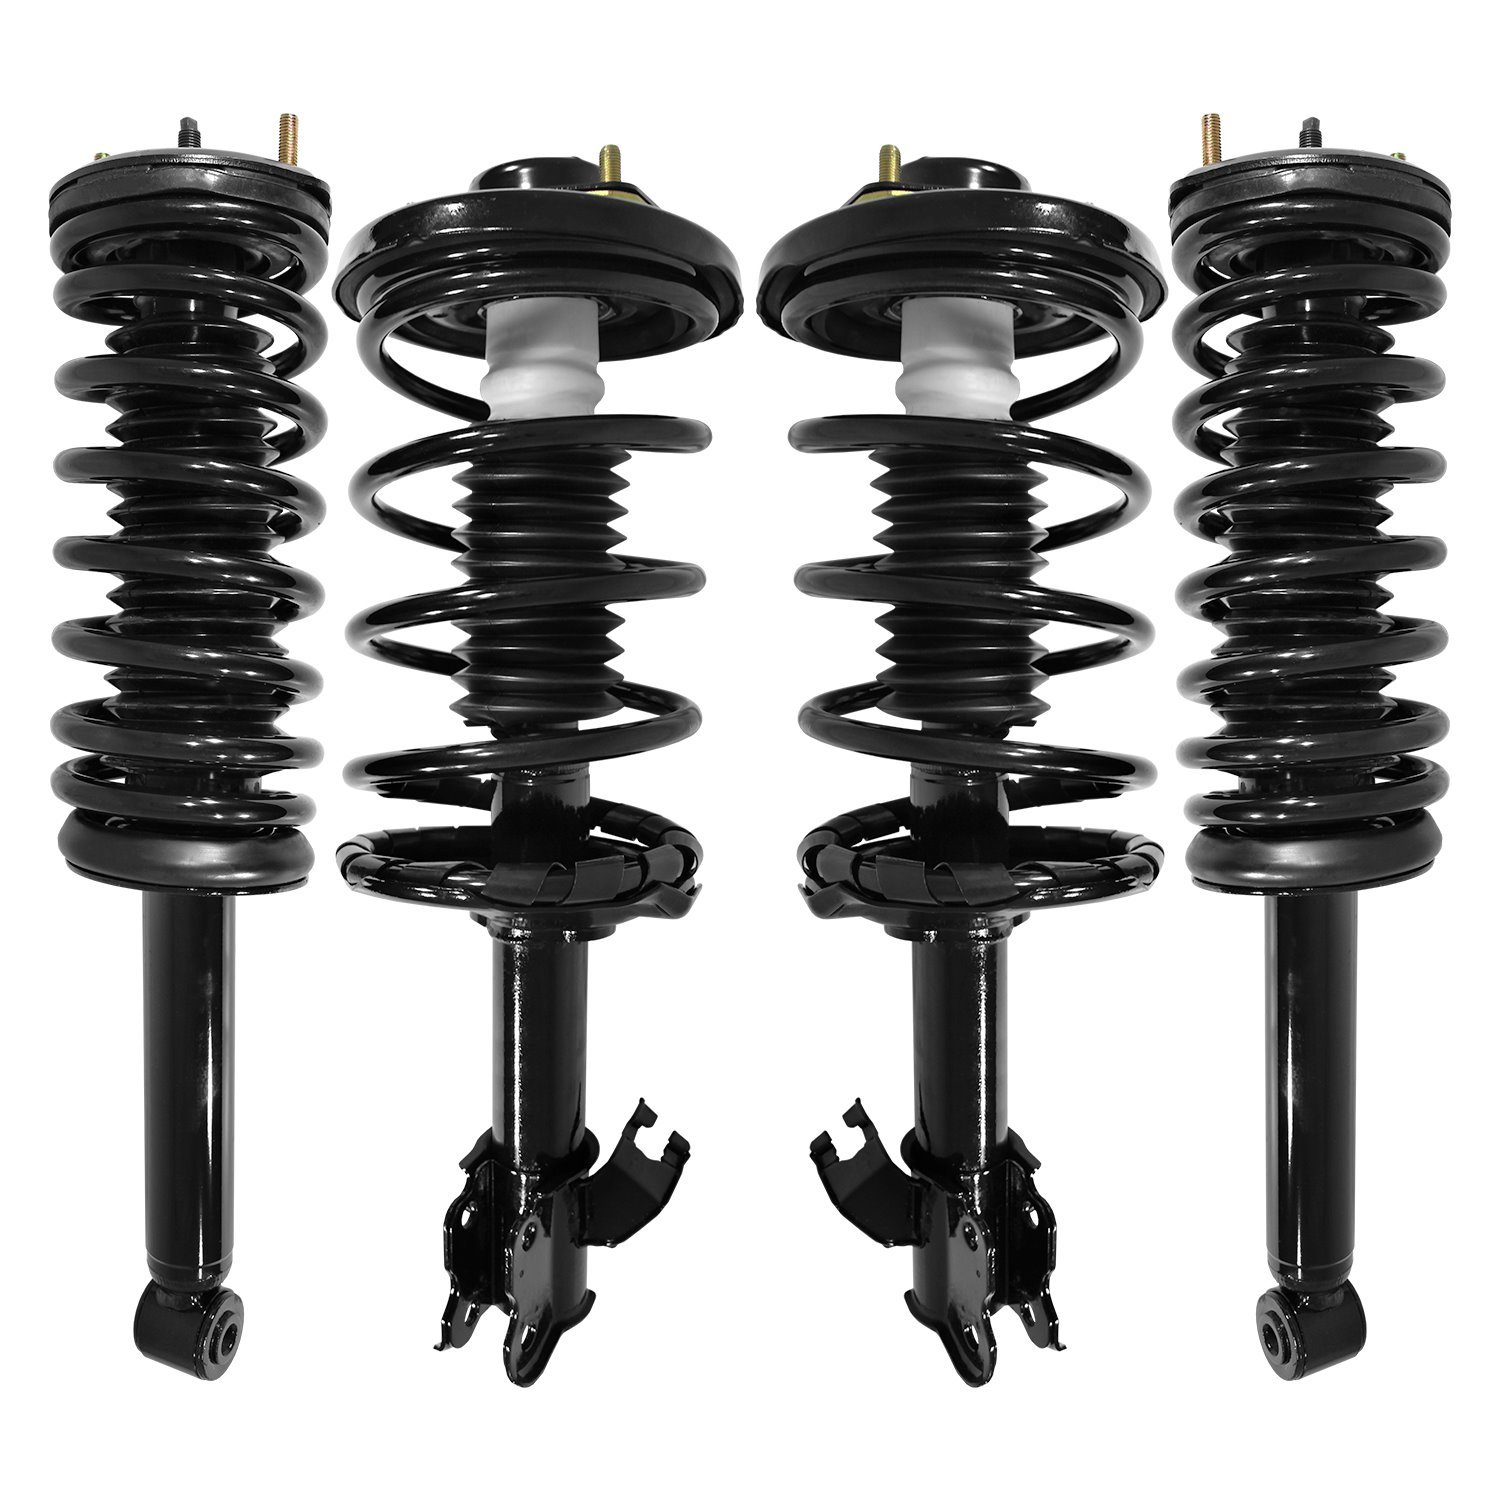 4-11431-15270-001 Front & Rear Suspension Strut & Coil Spring Assembly Kit Fits Select Nissan Maxima, Infiniti I30